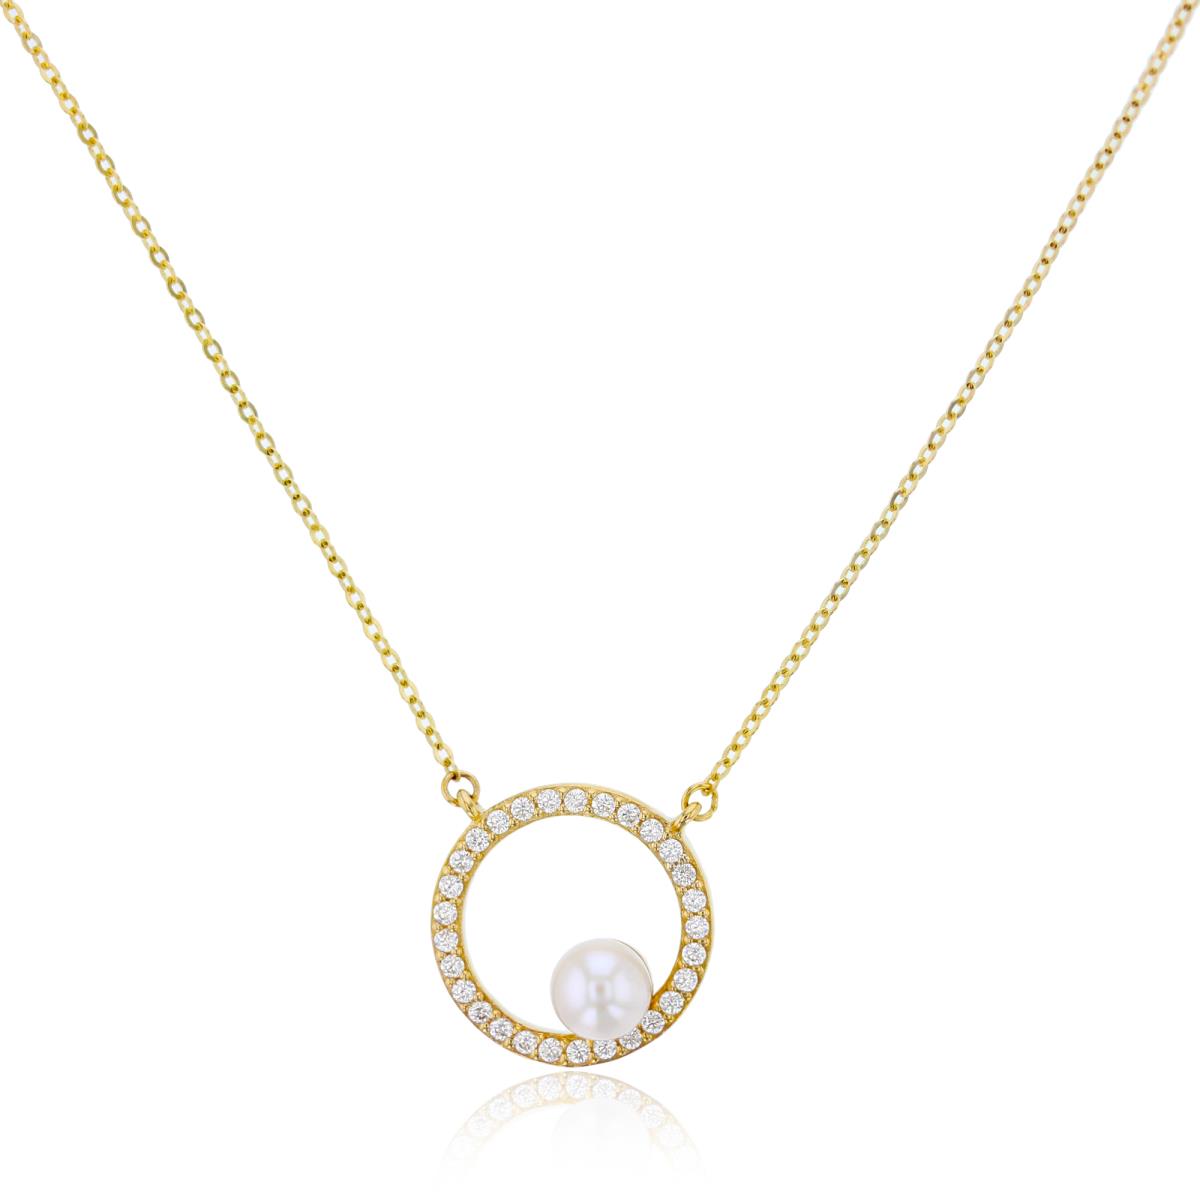 10K Yellow Gold 5mm Freshwater Pearl Open Paved Circle 17"+1" Necklace